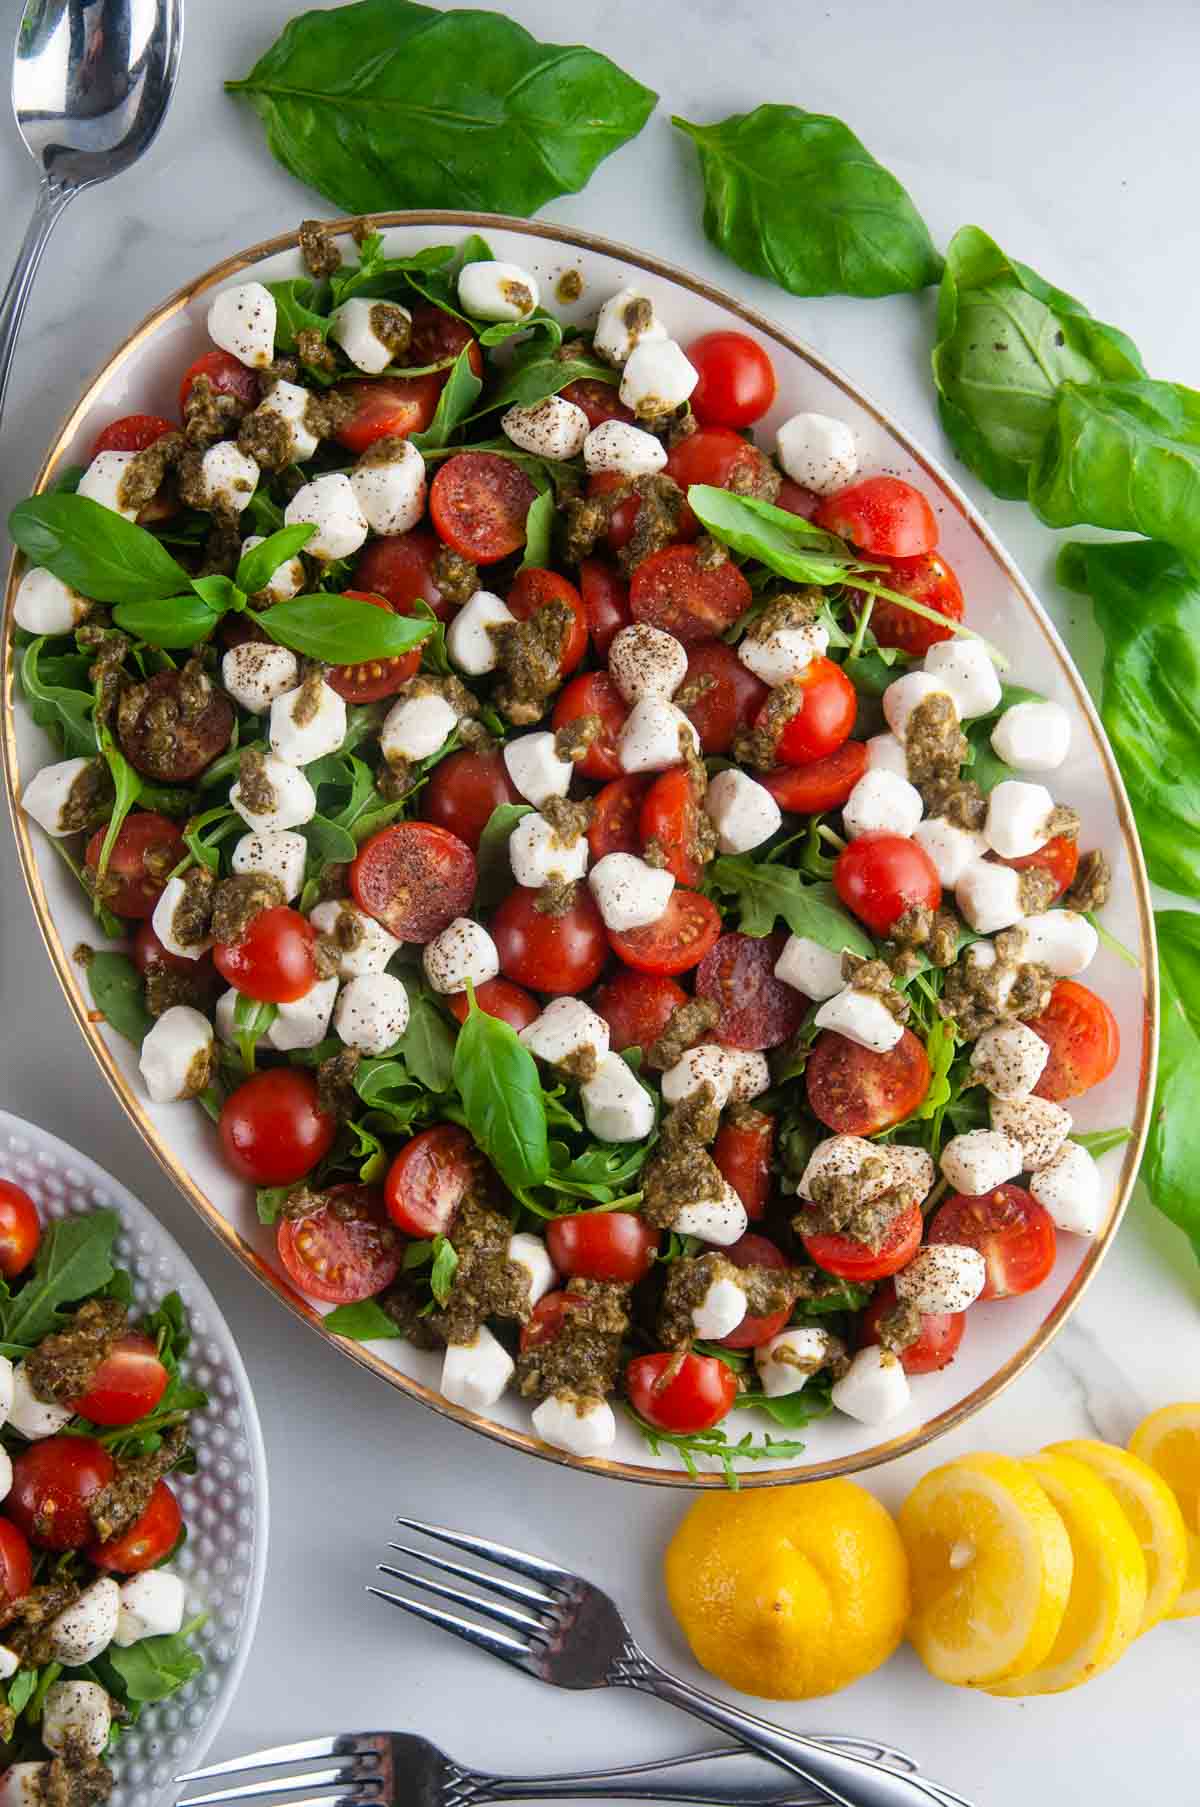 Easy pesto Caprese salad features creamy fresh mozzarella, sweet cherry tomatoes, and aromatic basil all served over sharp arugula and drizzled with lemon pesto.